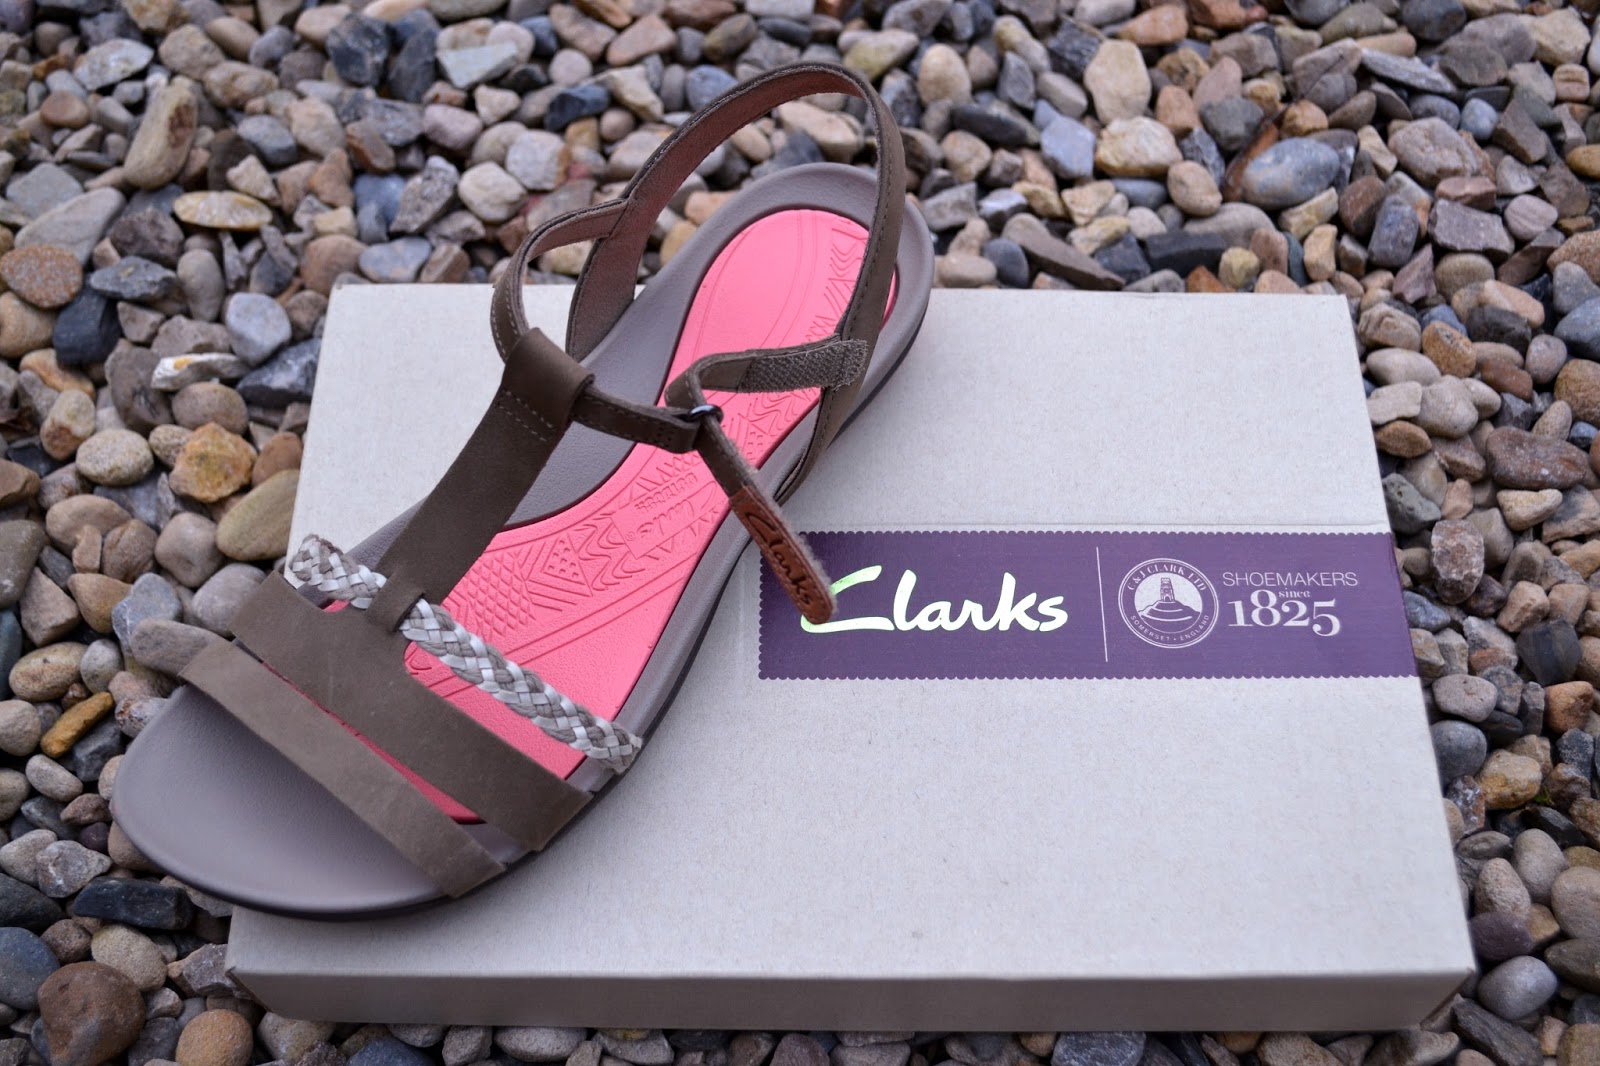 clarks summer shoes and sandals